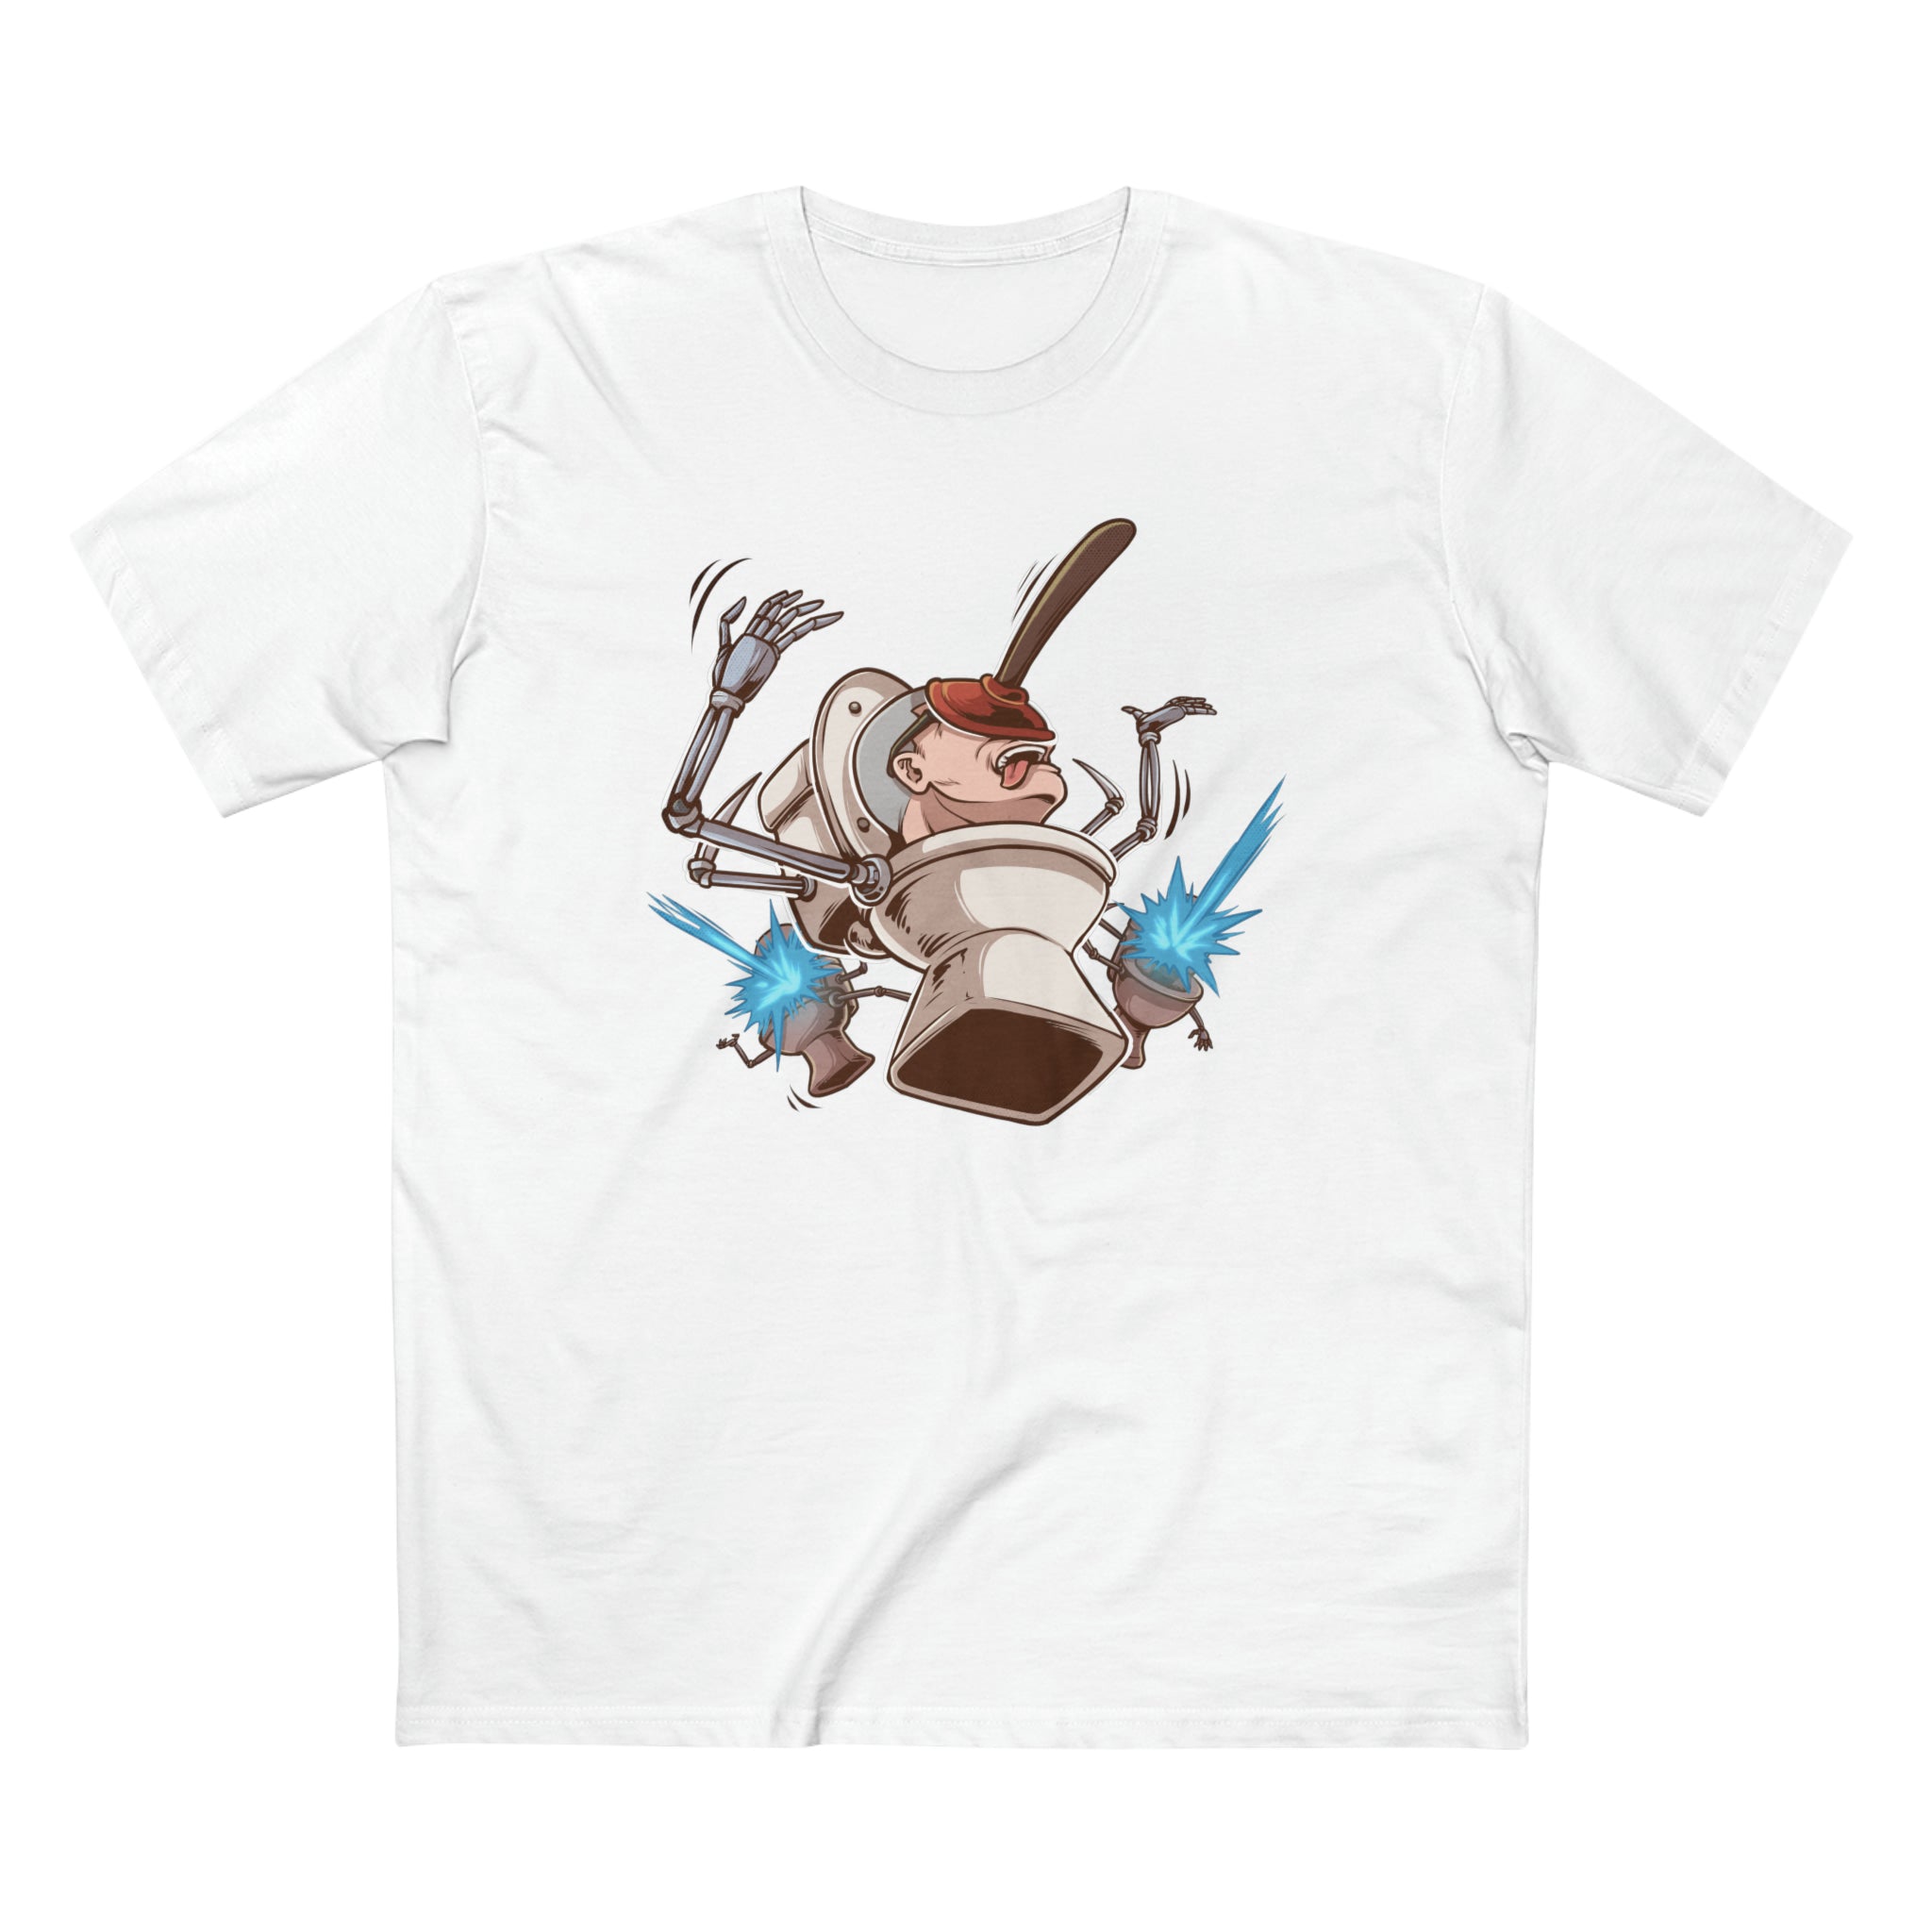 Plunger Face Tee - Adult